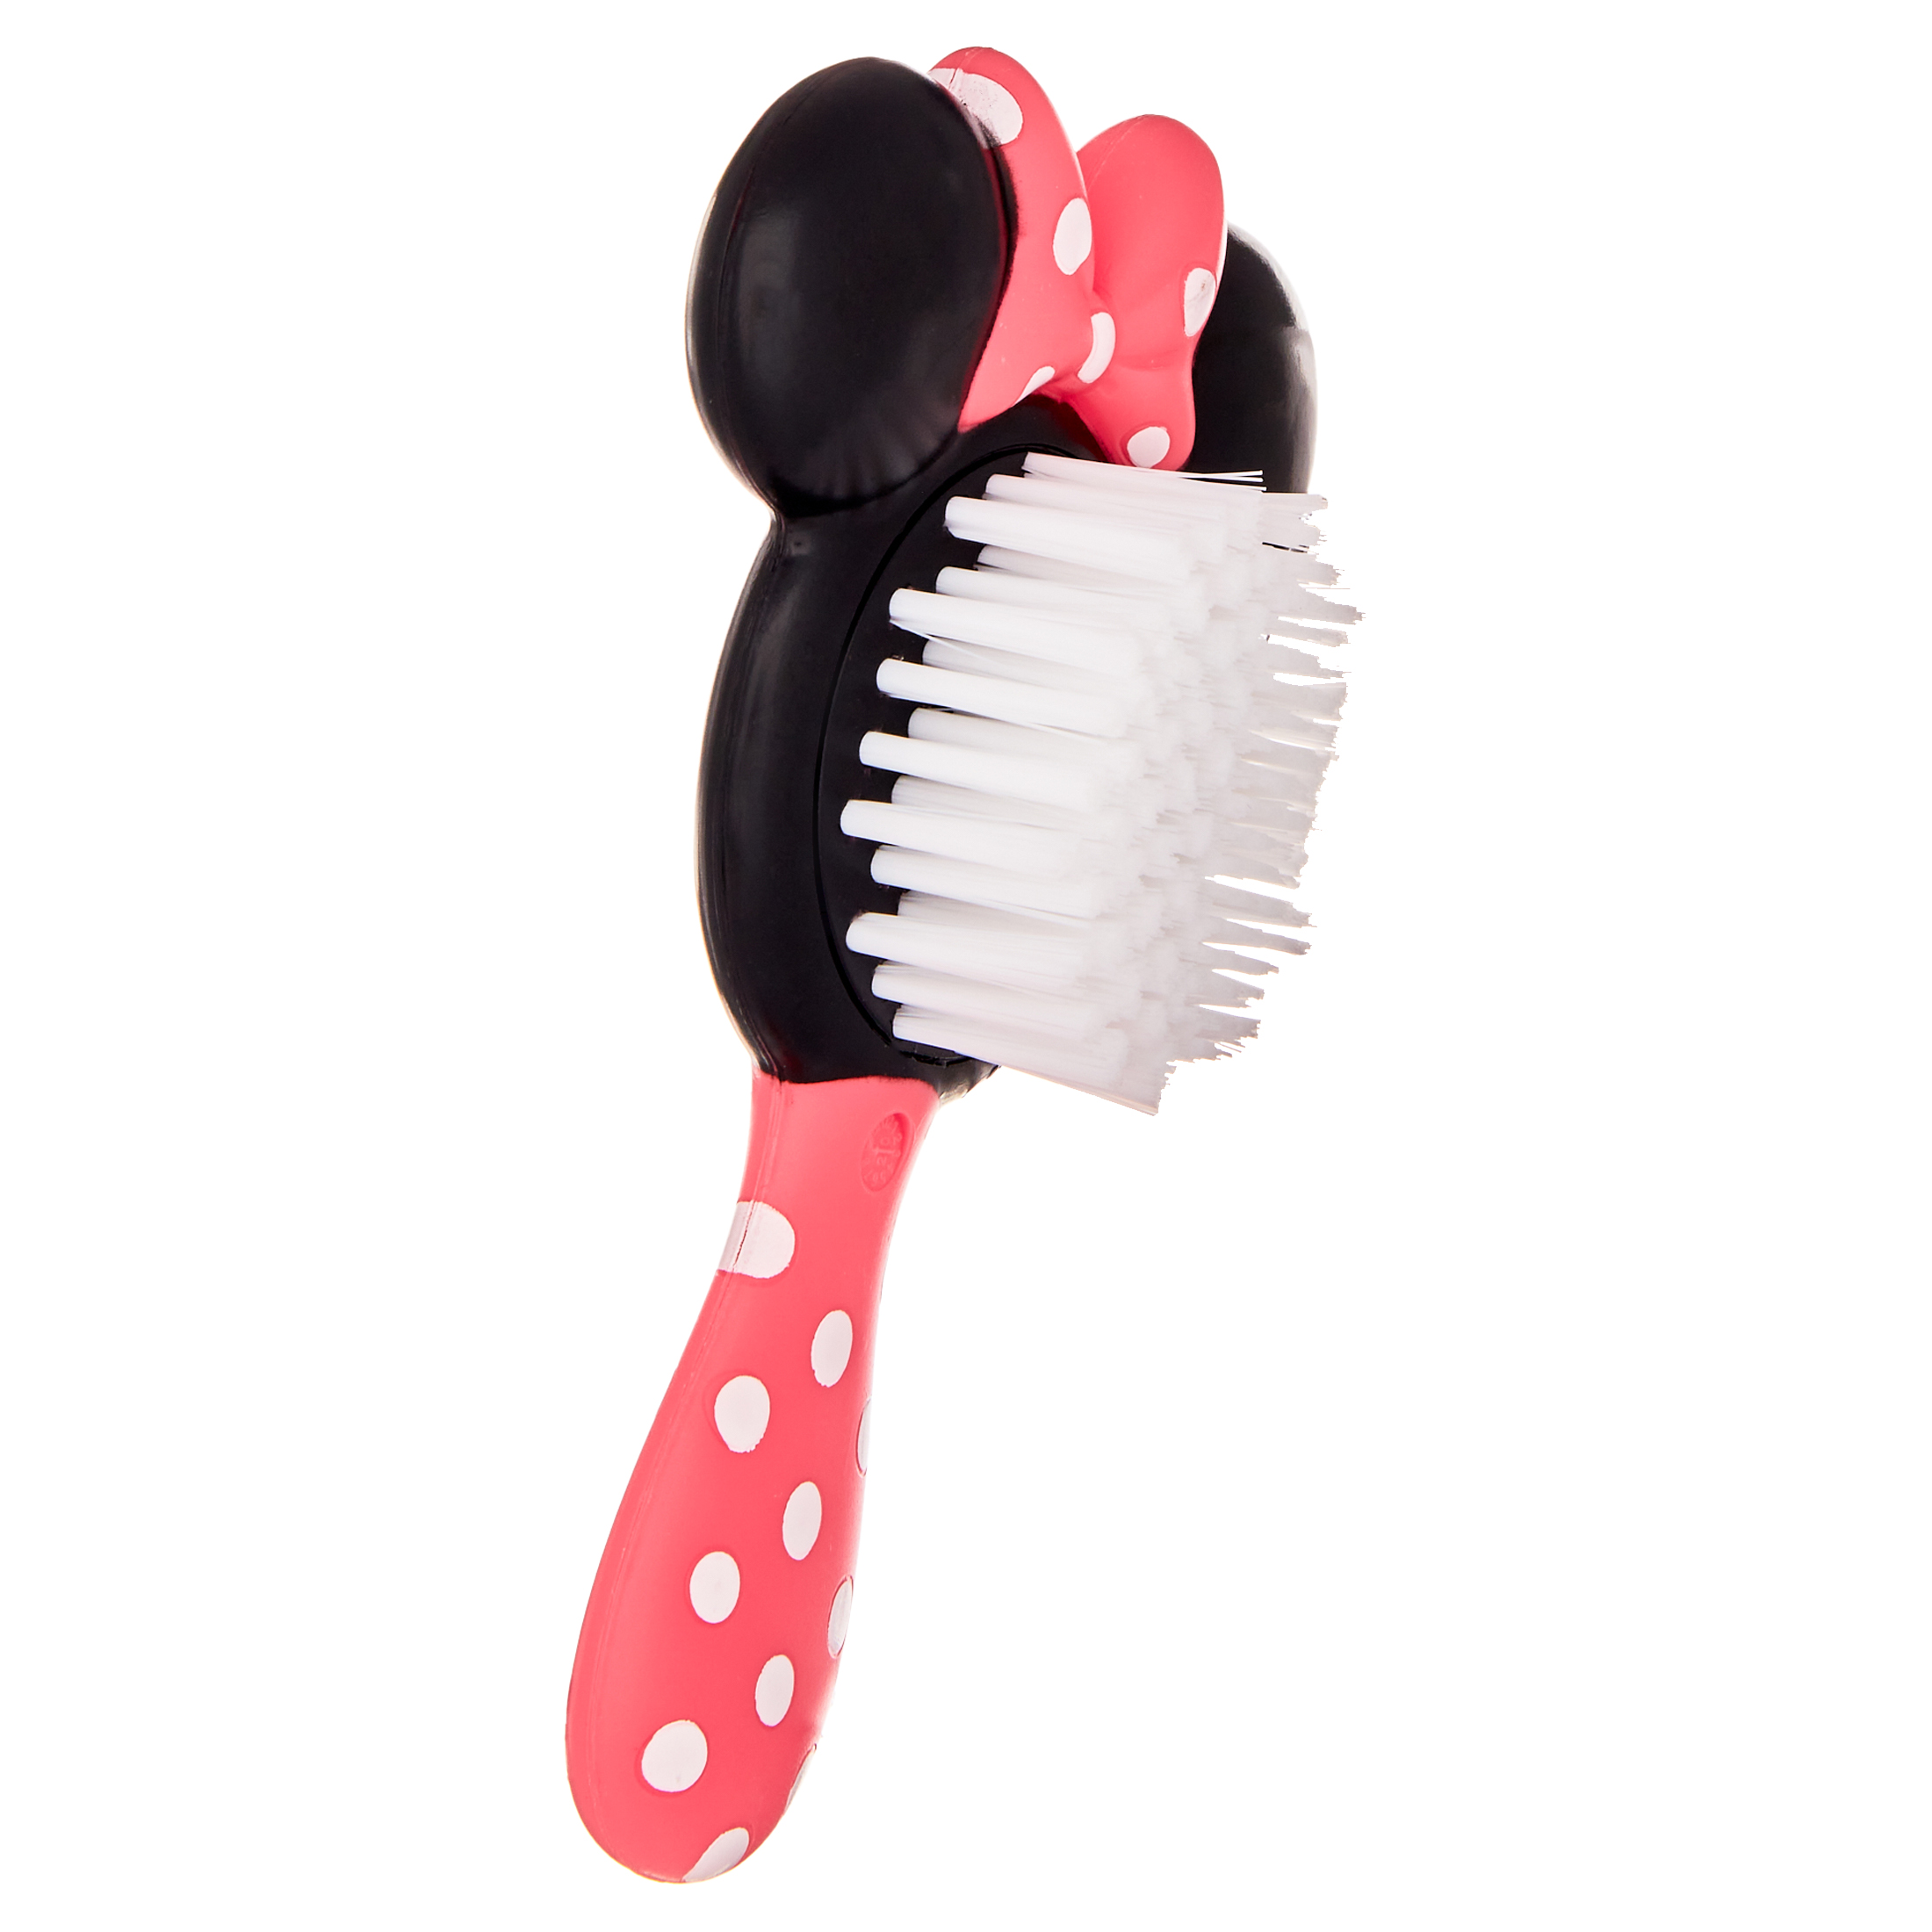 Disney Baby Minnie Brush & Comb Set with Easy-Grip Handle, Minnie - image 3 of 7